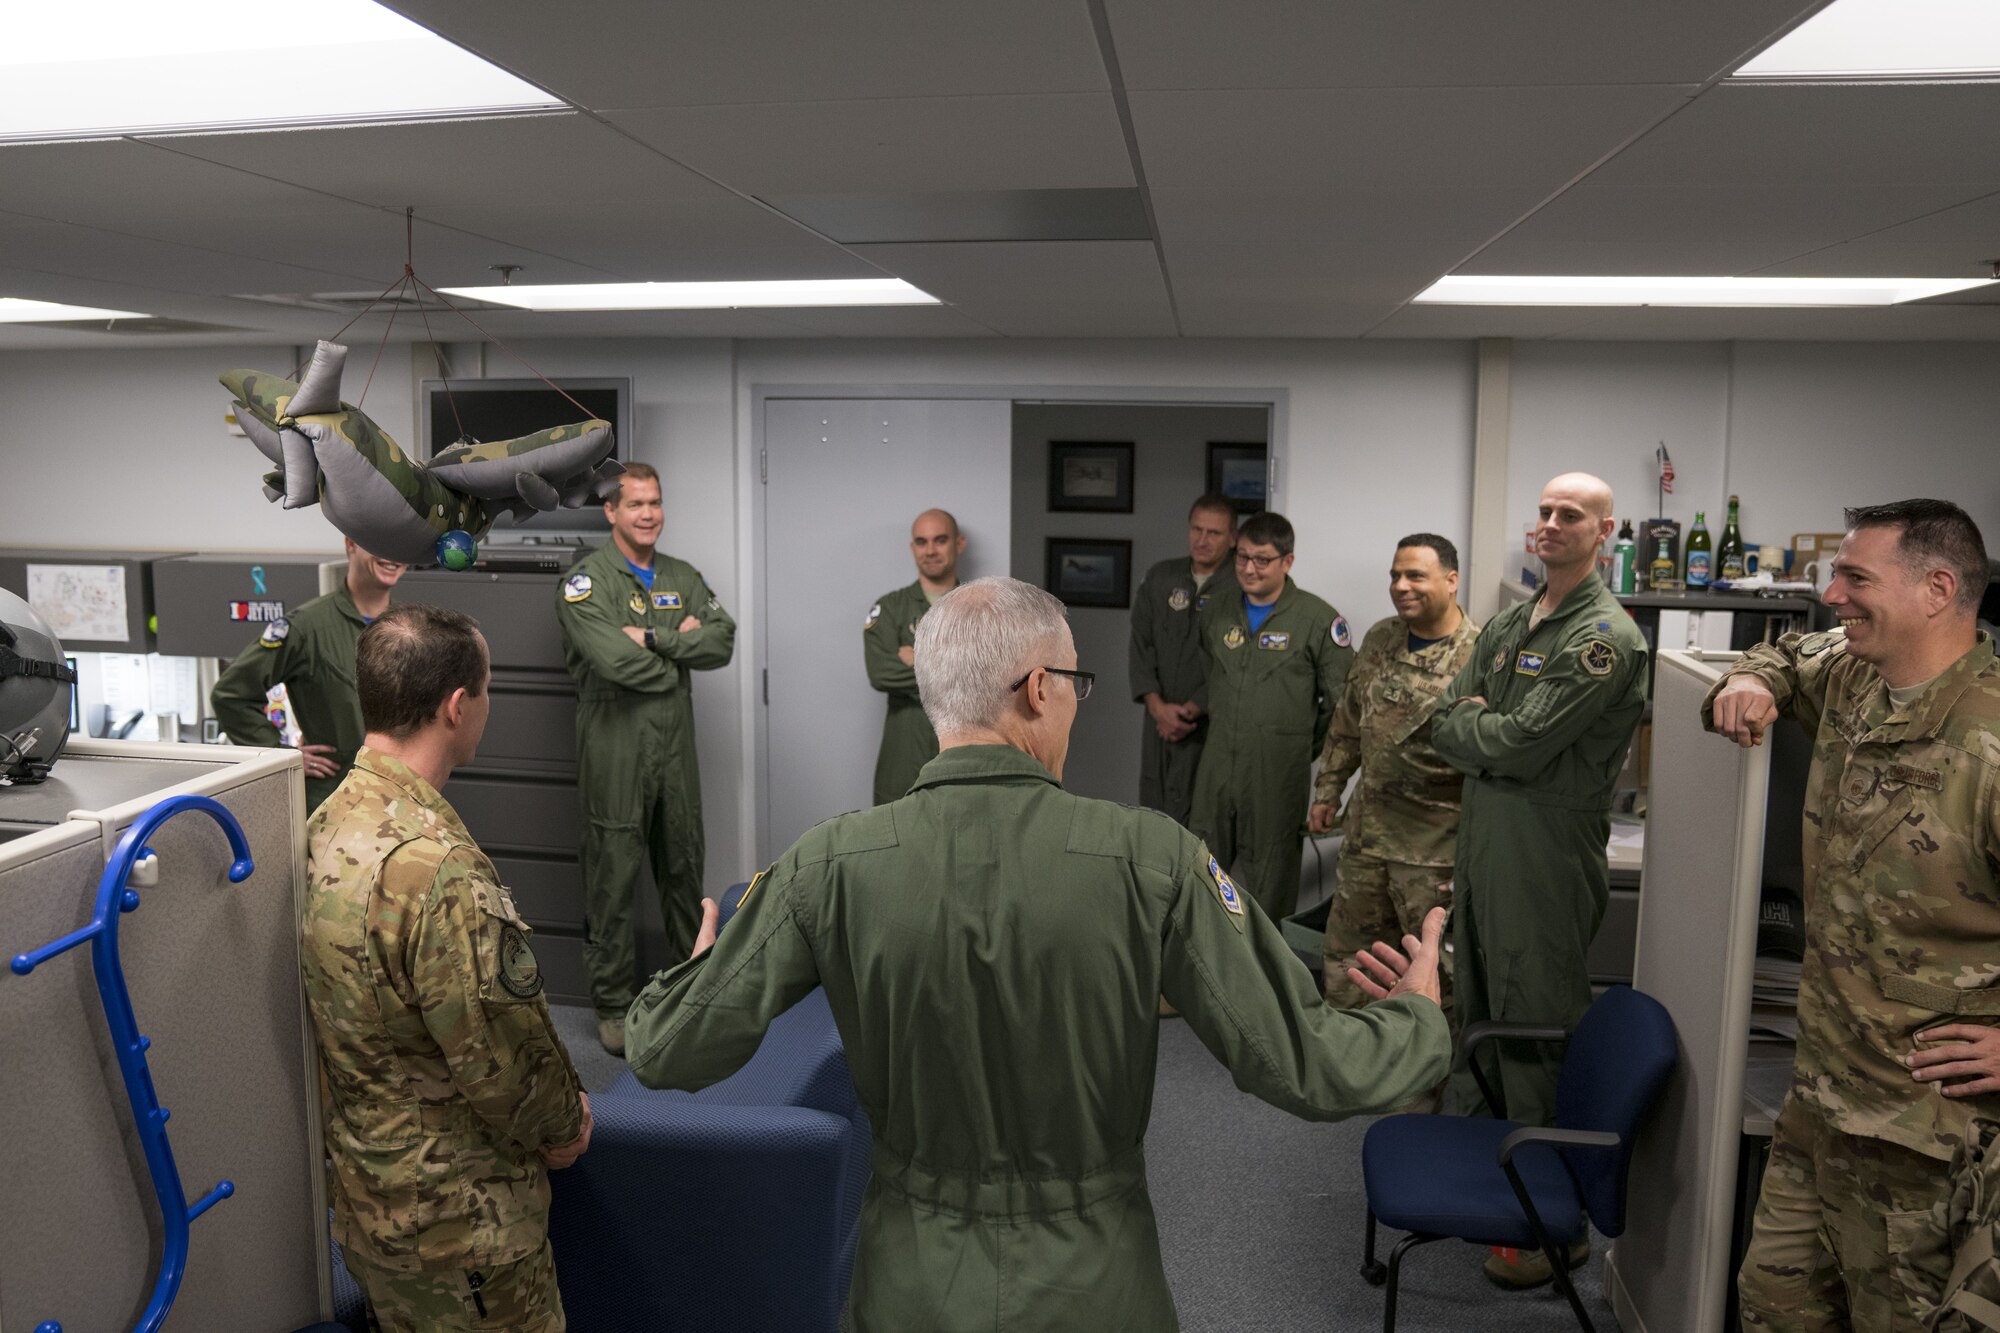 Maj. Gen. Craig La Fave, 22nd Air Force commander, speaks with members of the 339th Flight Test Squadron Feb. 2, 2018, at Robins Air Force Base, Georgia. This was La Fave's first visit to the unit since taking his new position in November of 2017. (U.S. Air Force photo by Jamal D. Sutter)